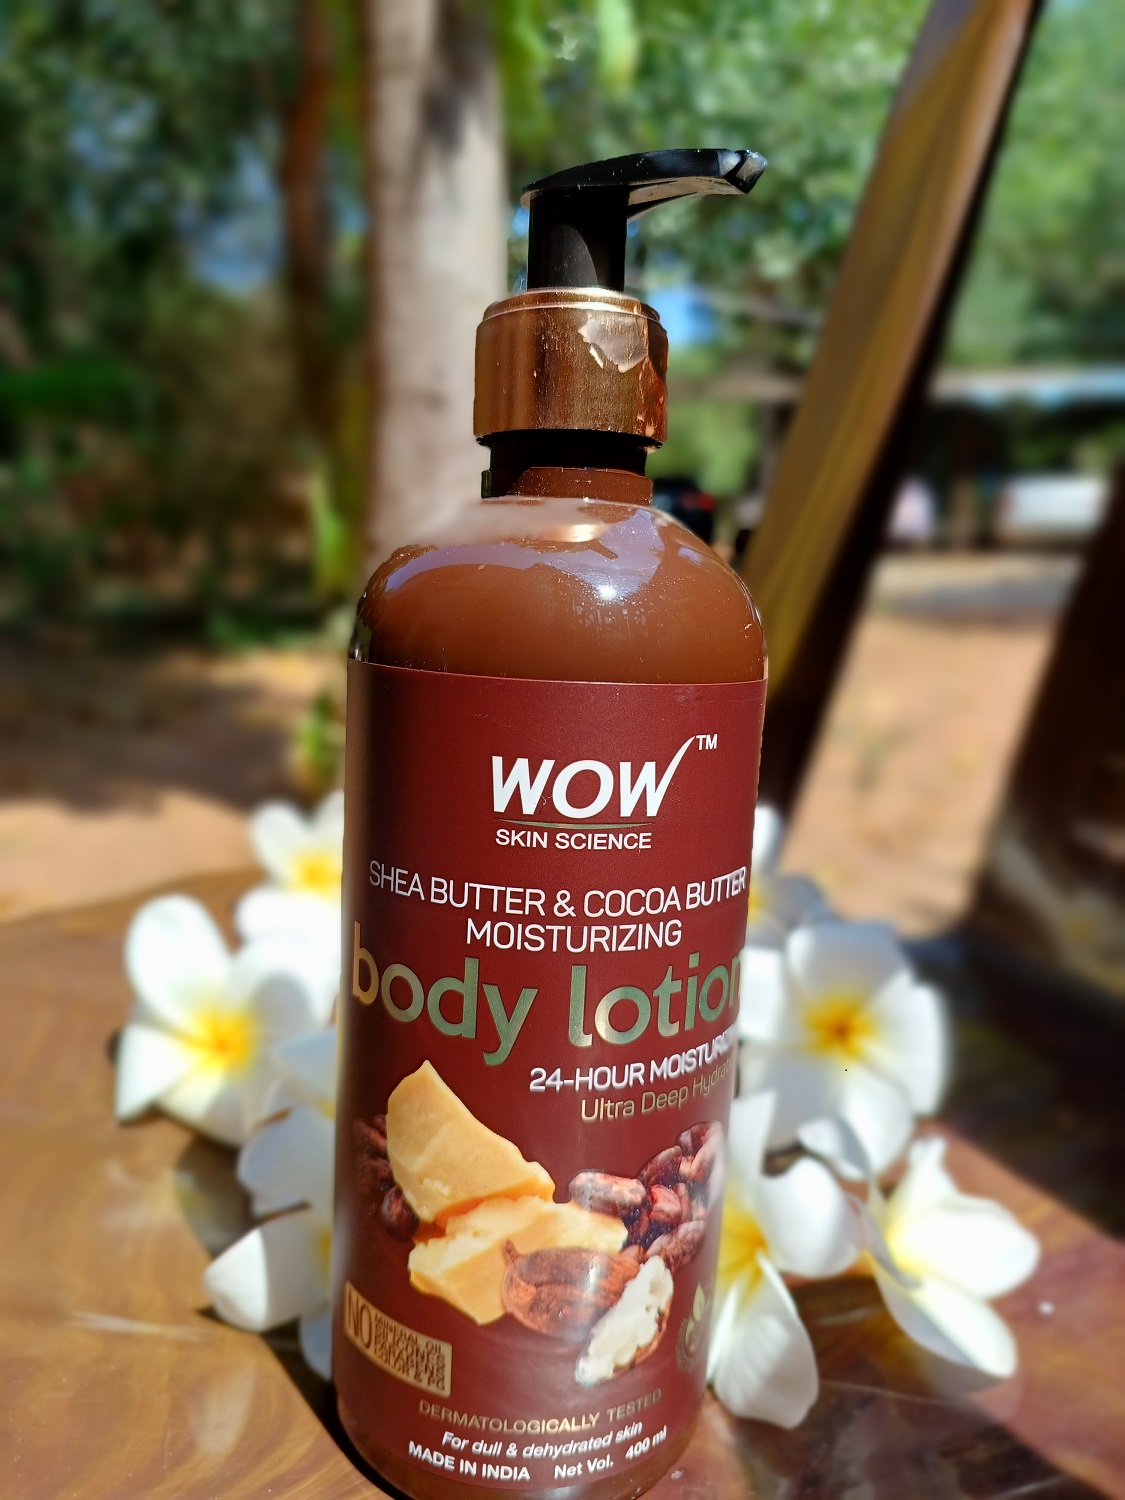 Wow Shea Butter and Cocoa Butter Moisturizing Body Lotion Review